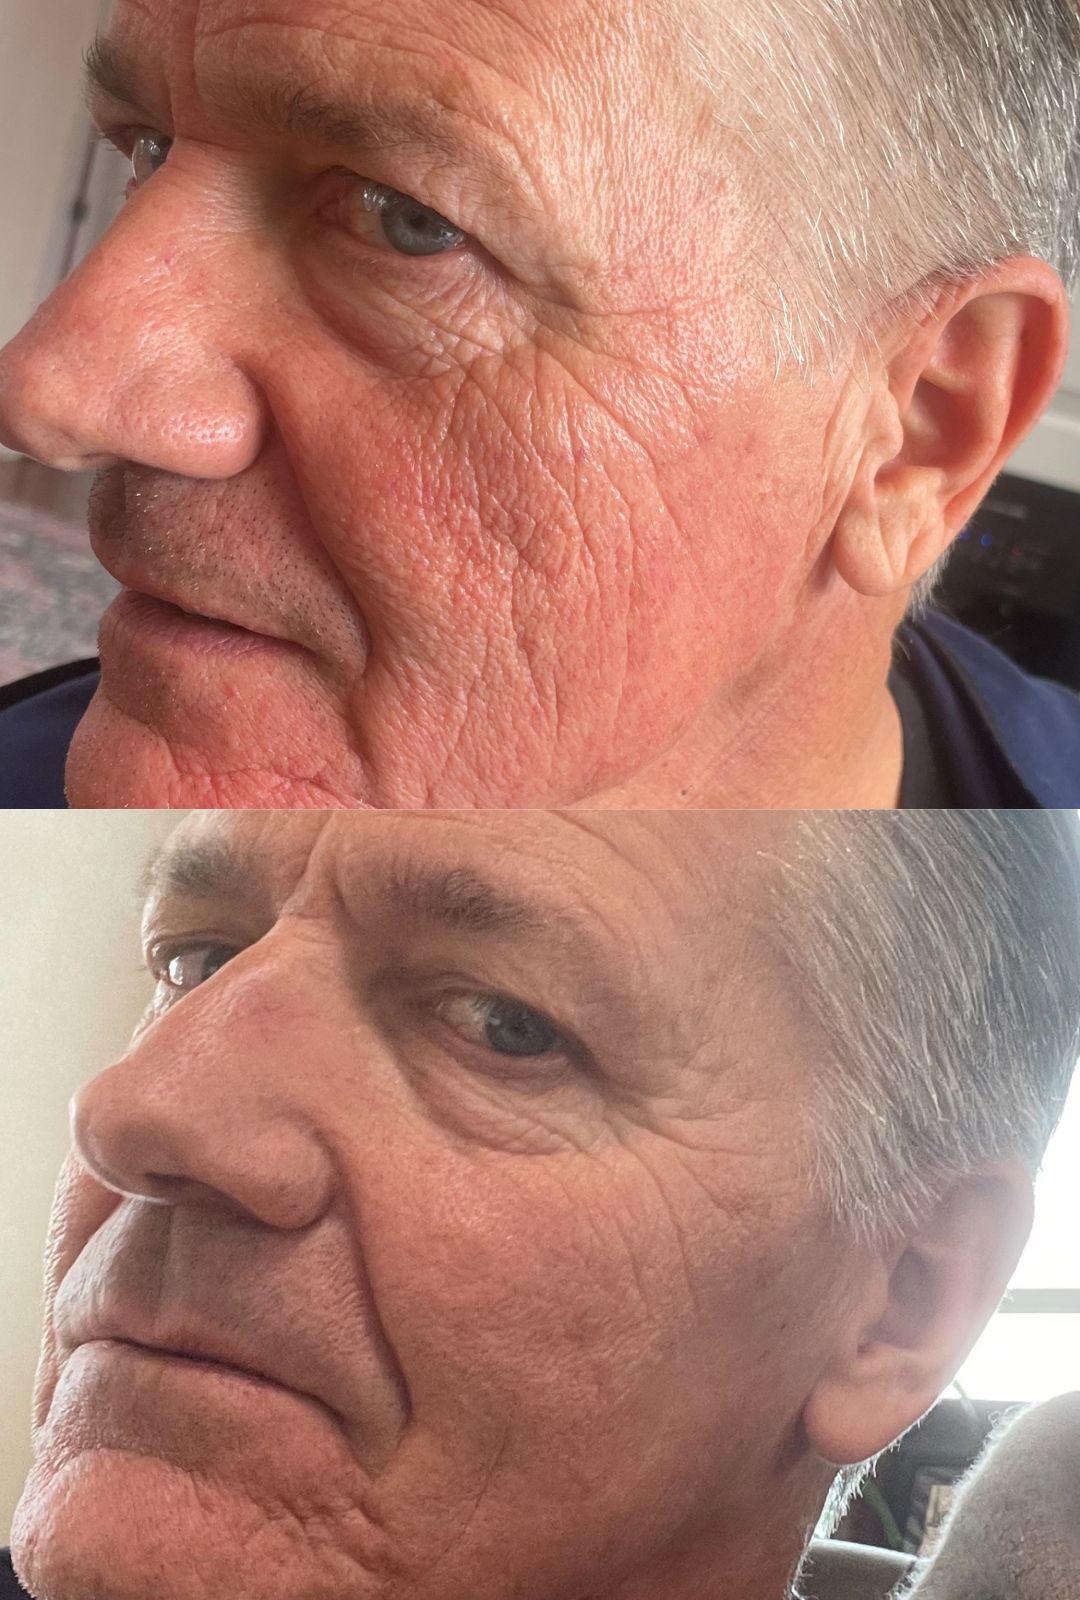 7 days post microneedling with daily PRX⁸ application